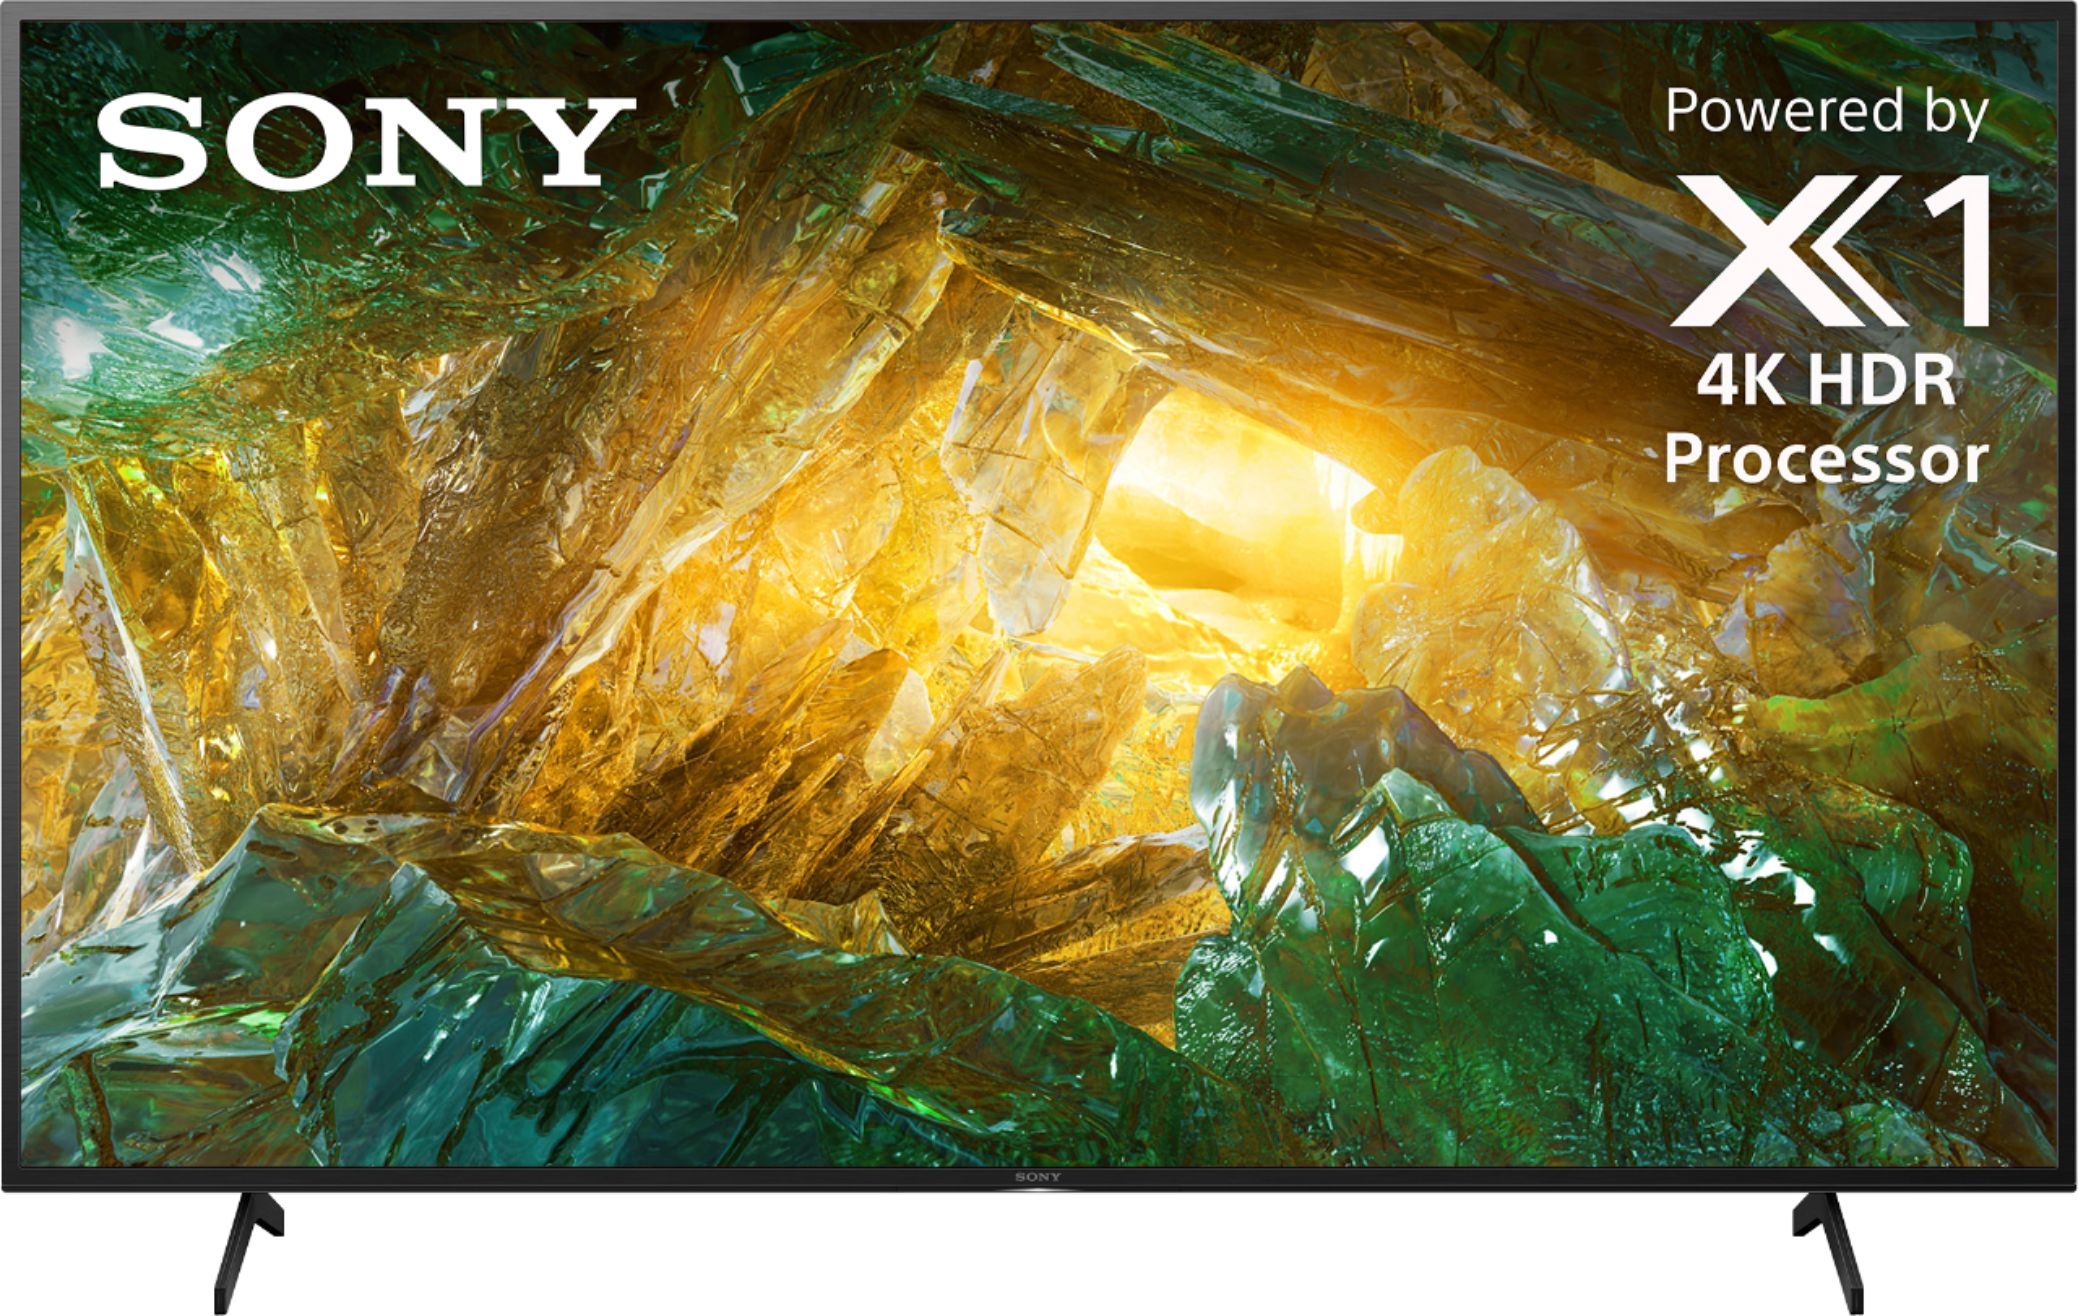 Sony - 65" Class X800H Series LED 4K UHD Smart Android TV